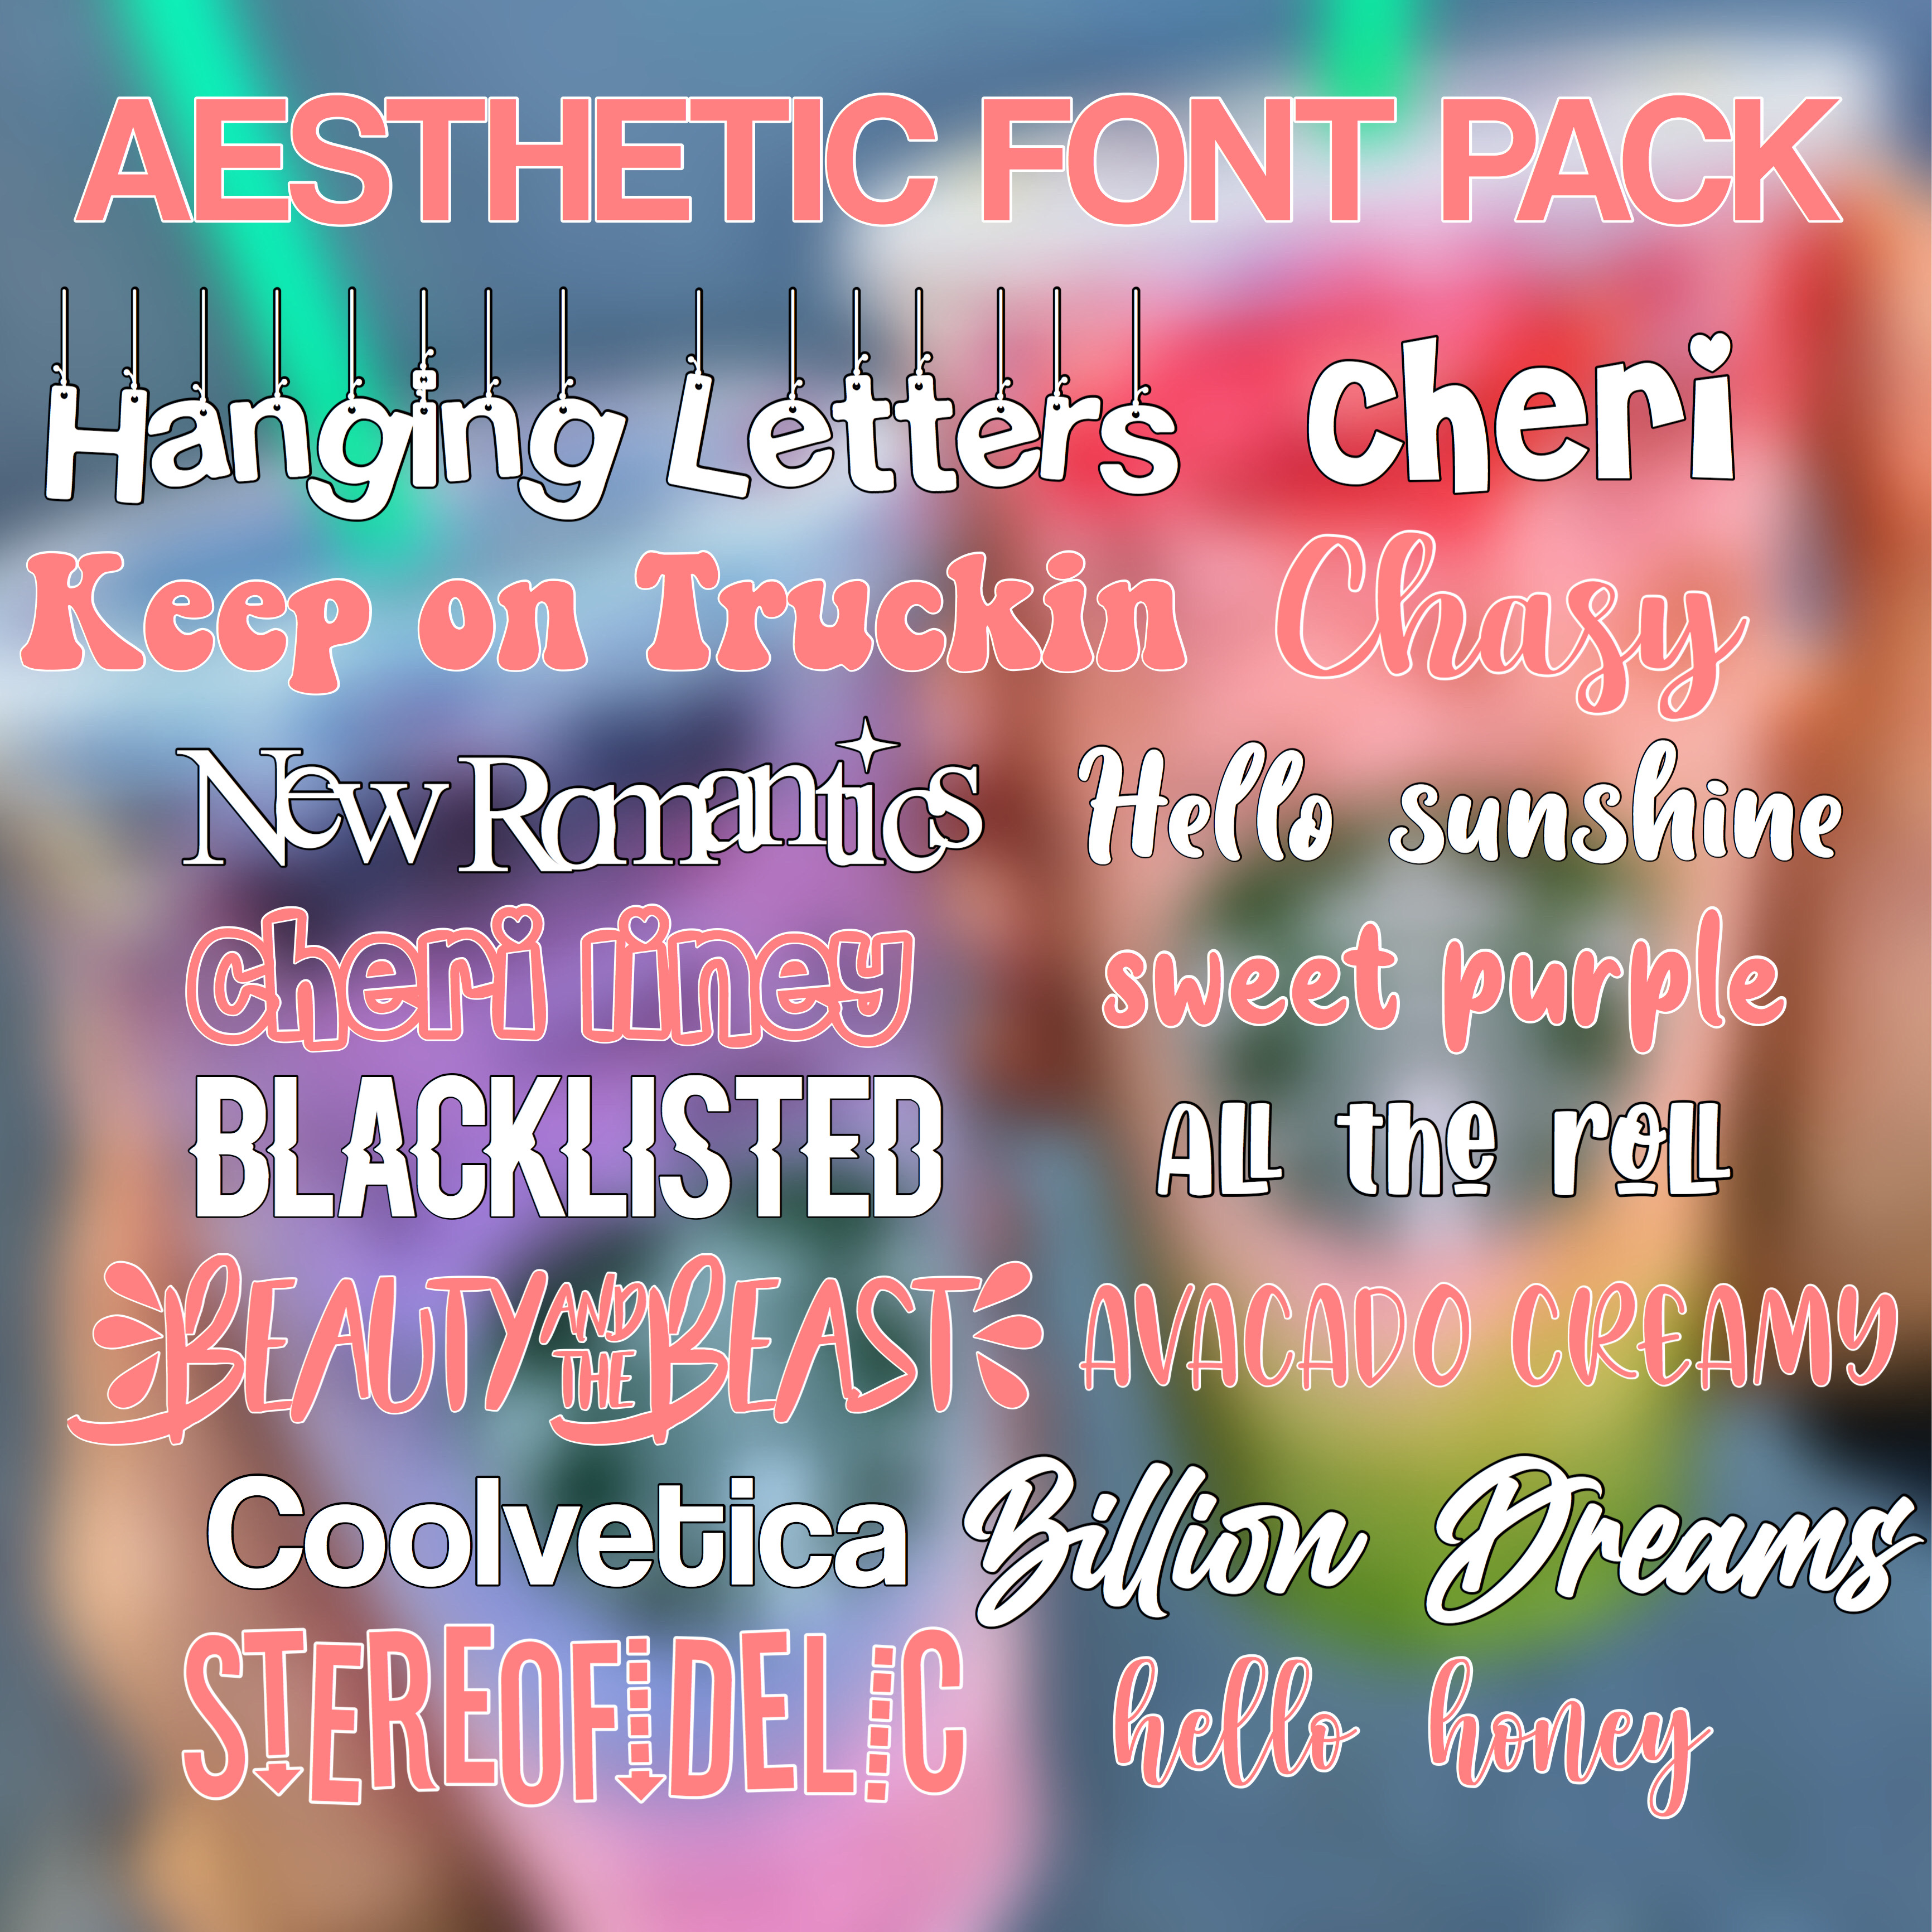 Fontpack Font Fonts Aesthetic 333106200028201 By @Fqiryhelps